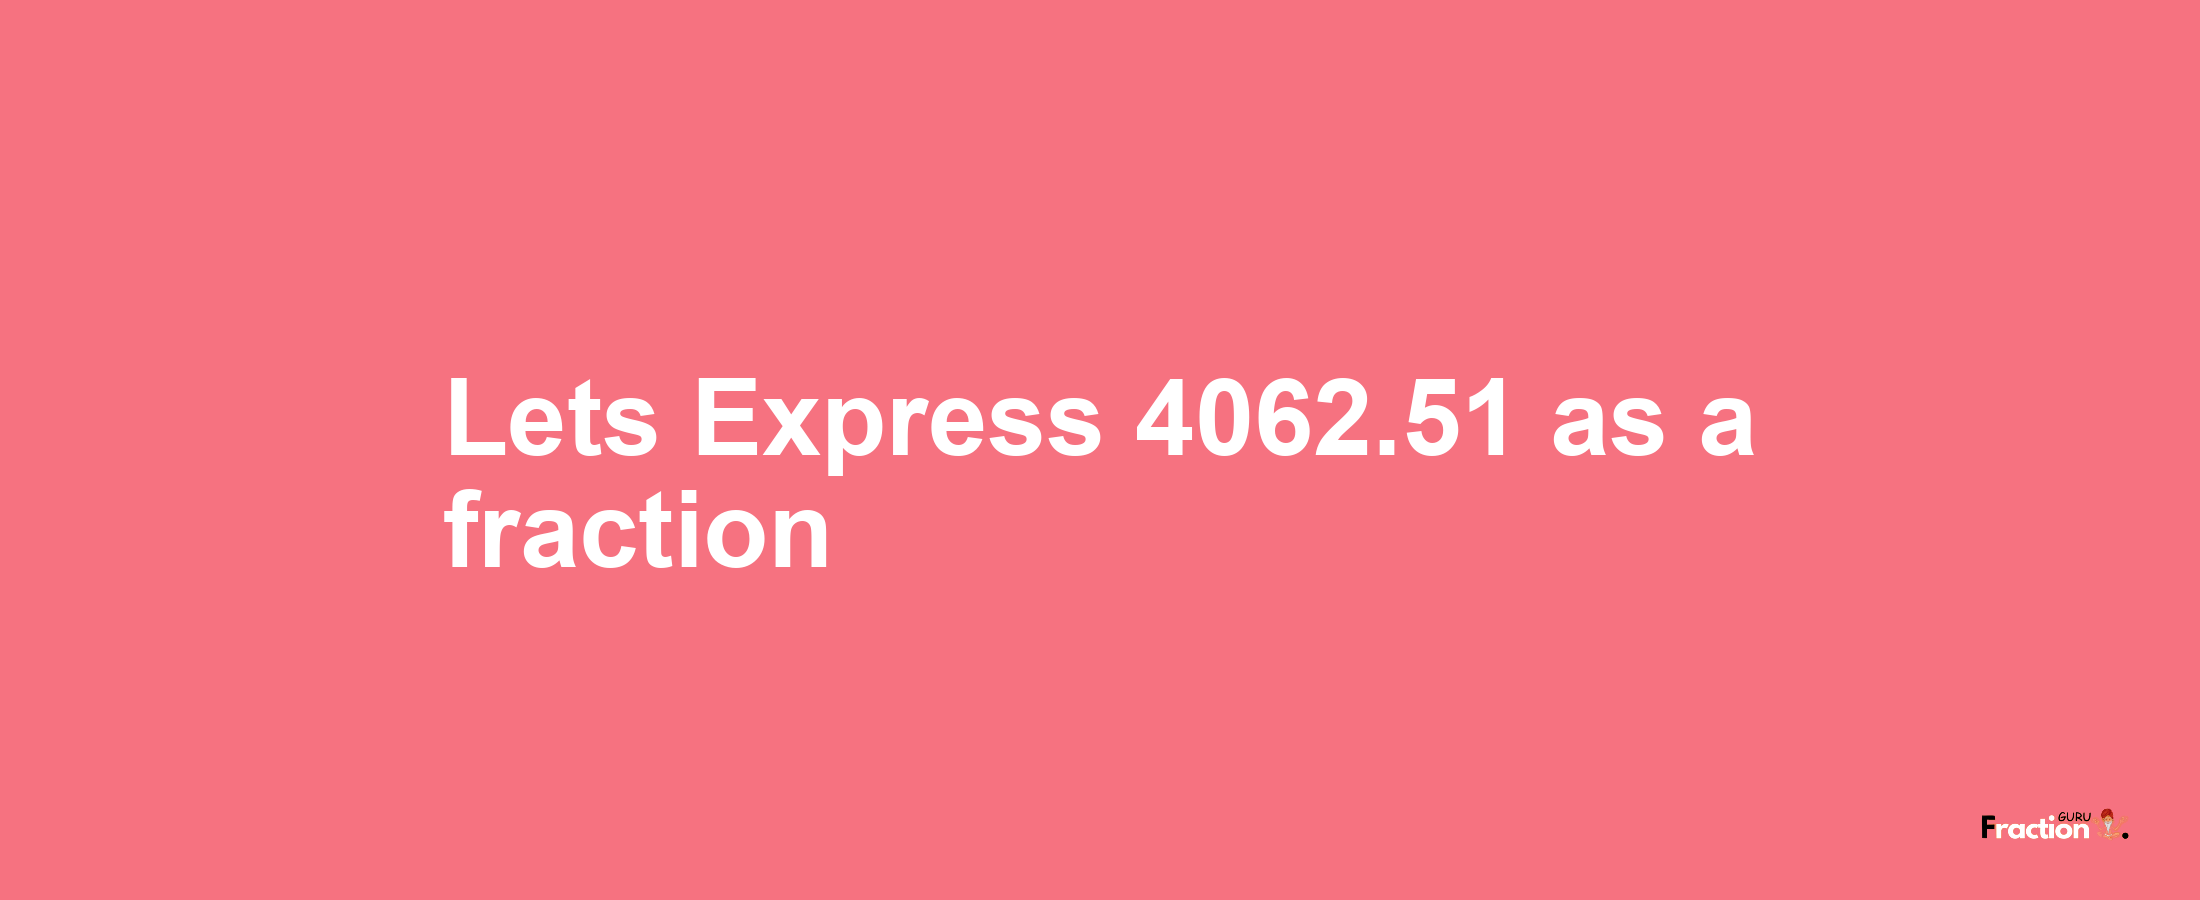 Lets Express 4062.51 as afraction